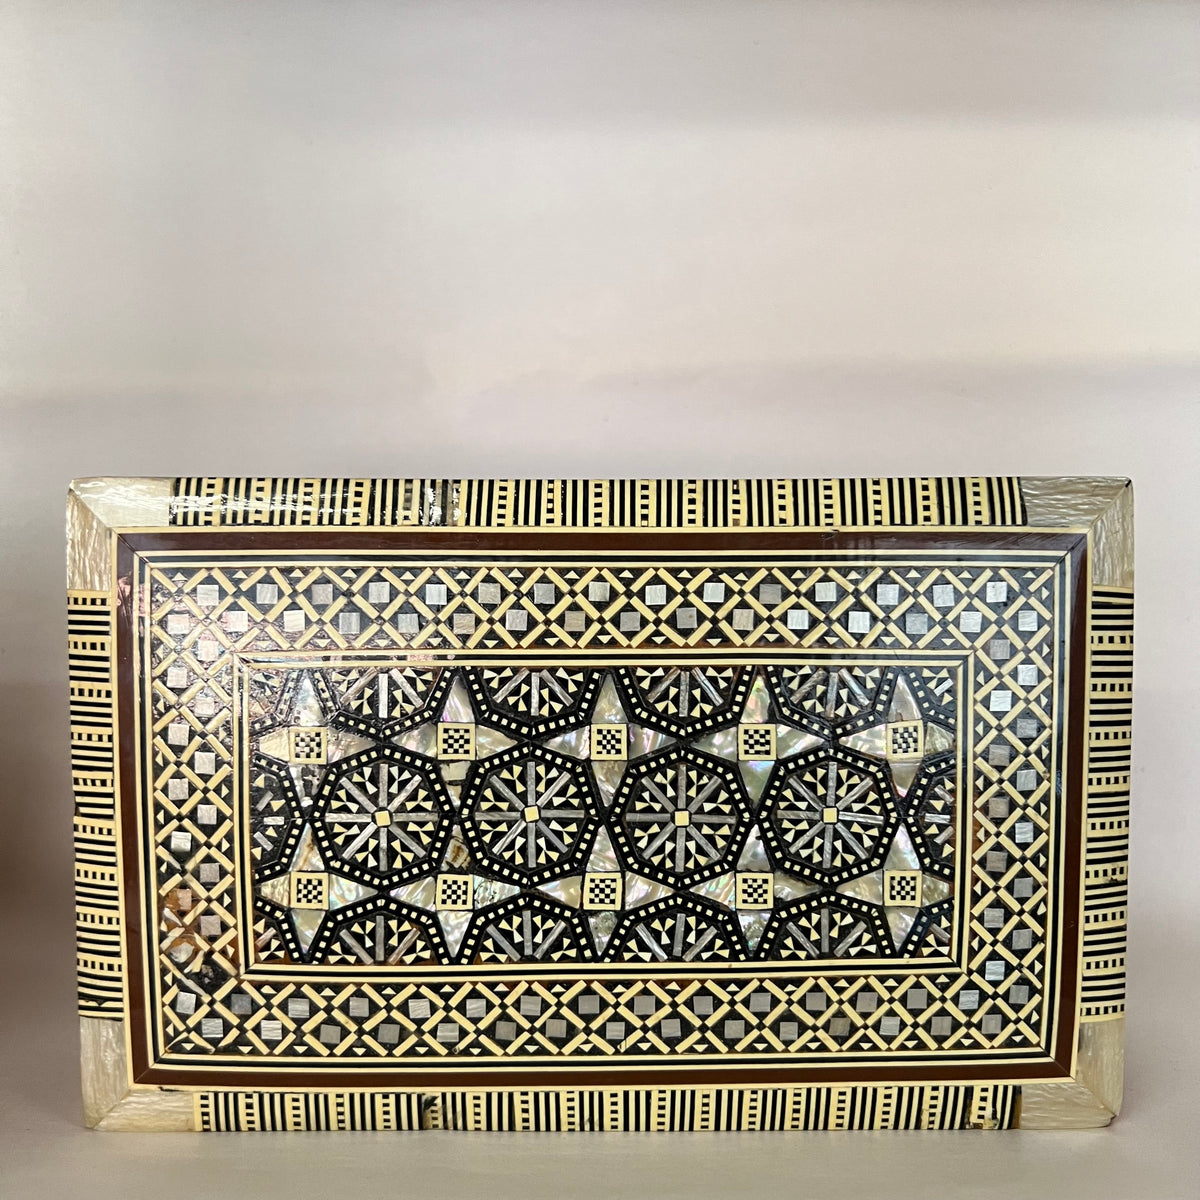 Mosiac box circa 1950's-1960's, inlaid with mother-of-pearl.  Detailed, lovely, lined in velvet.